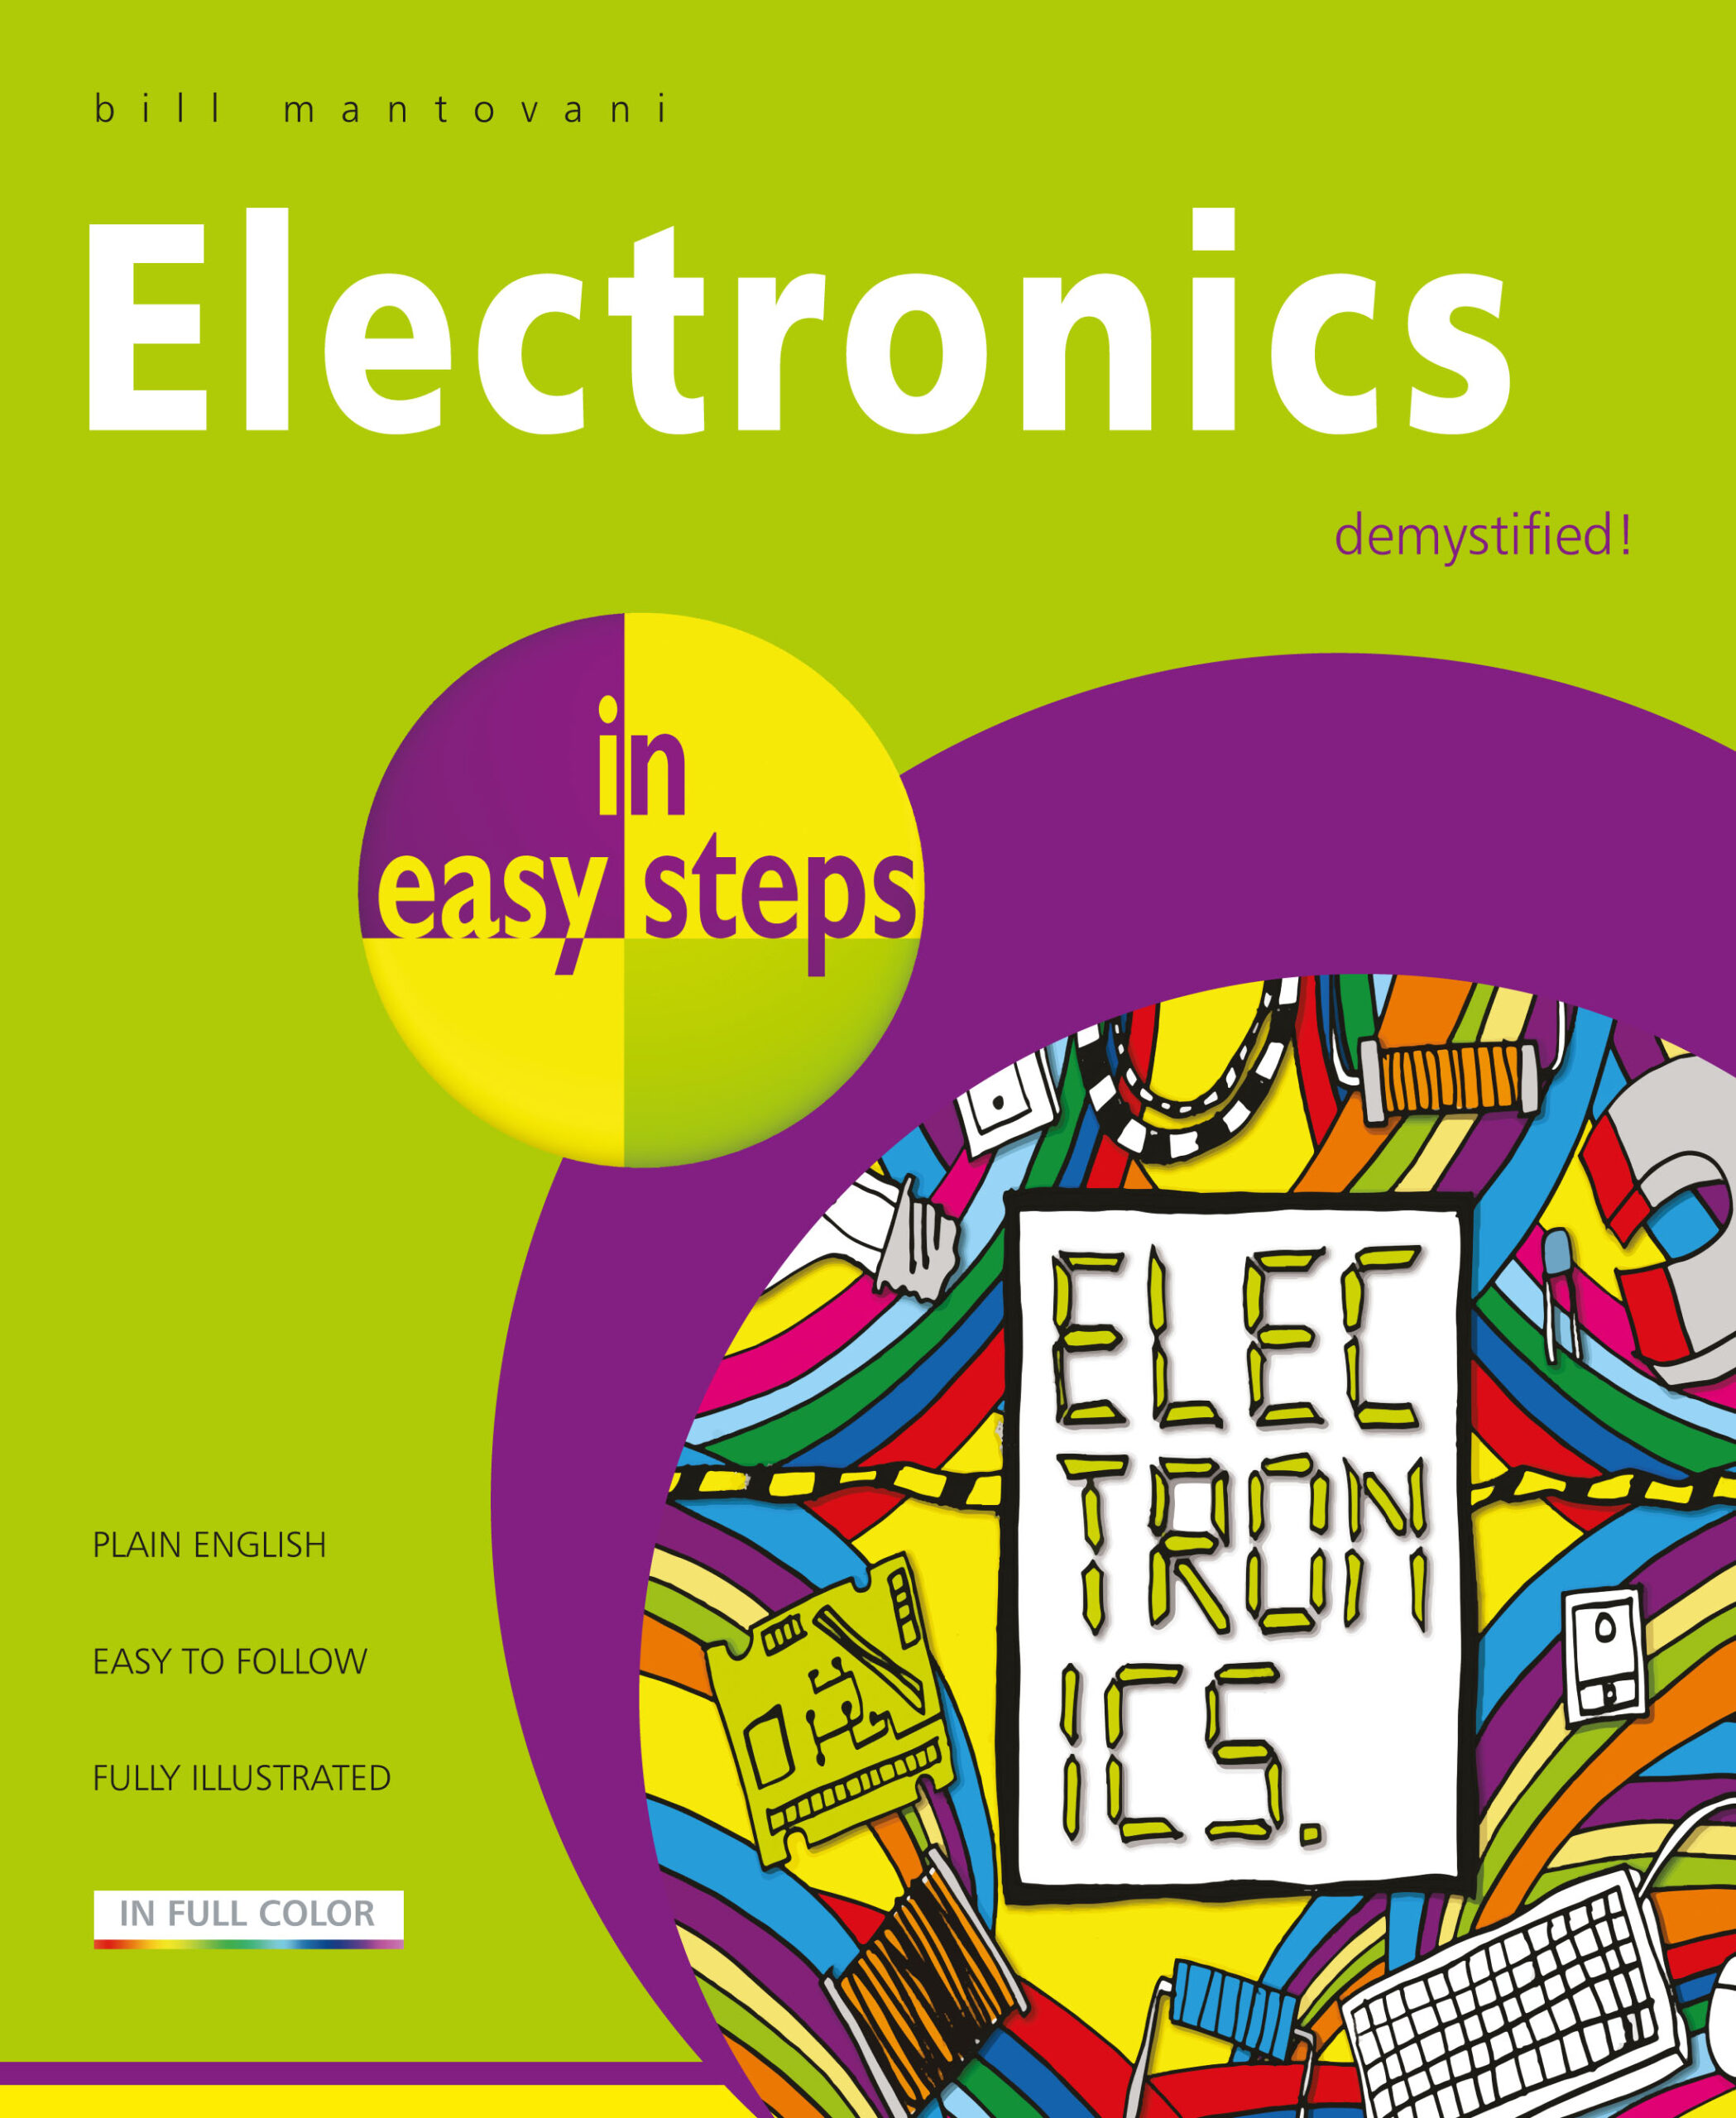 Electronics in easy steps